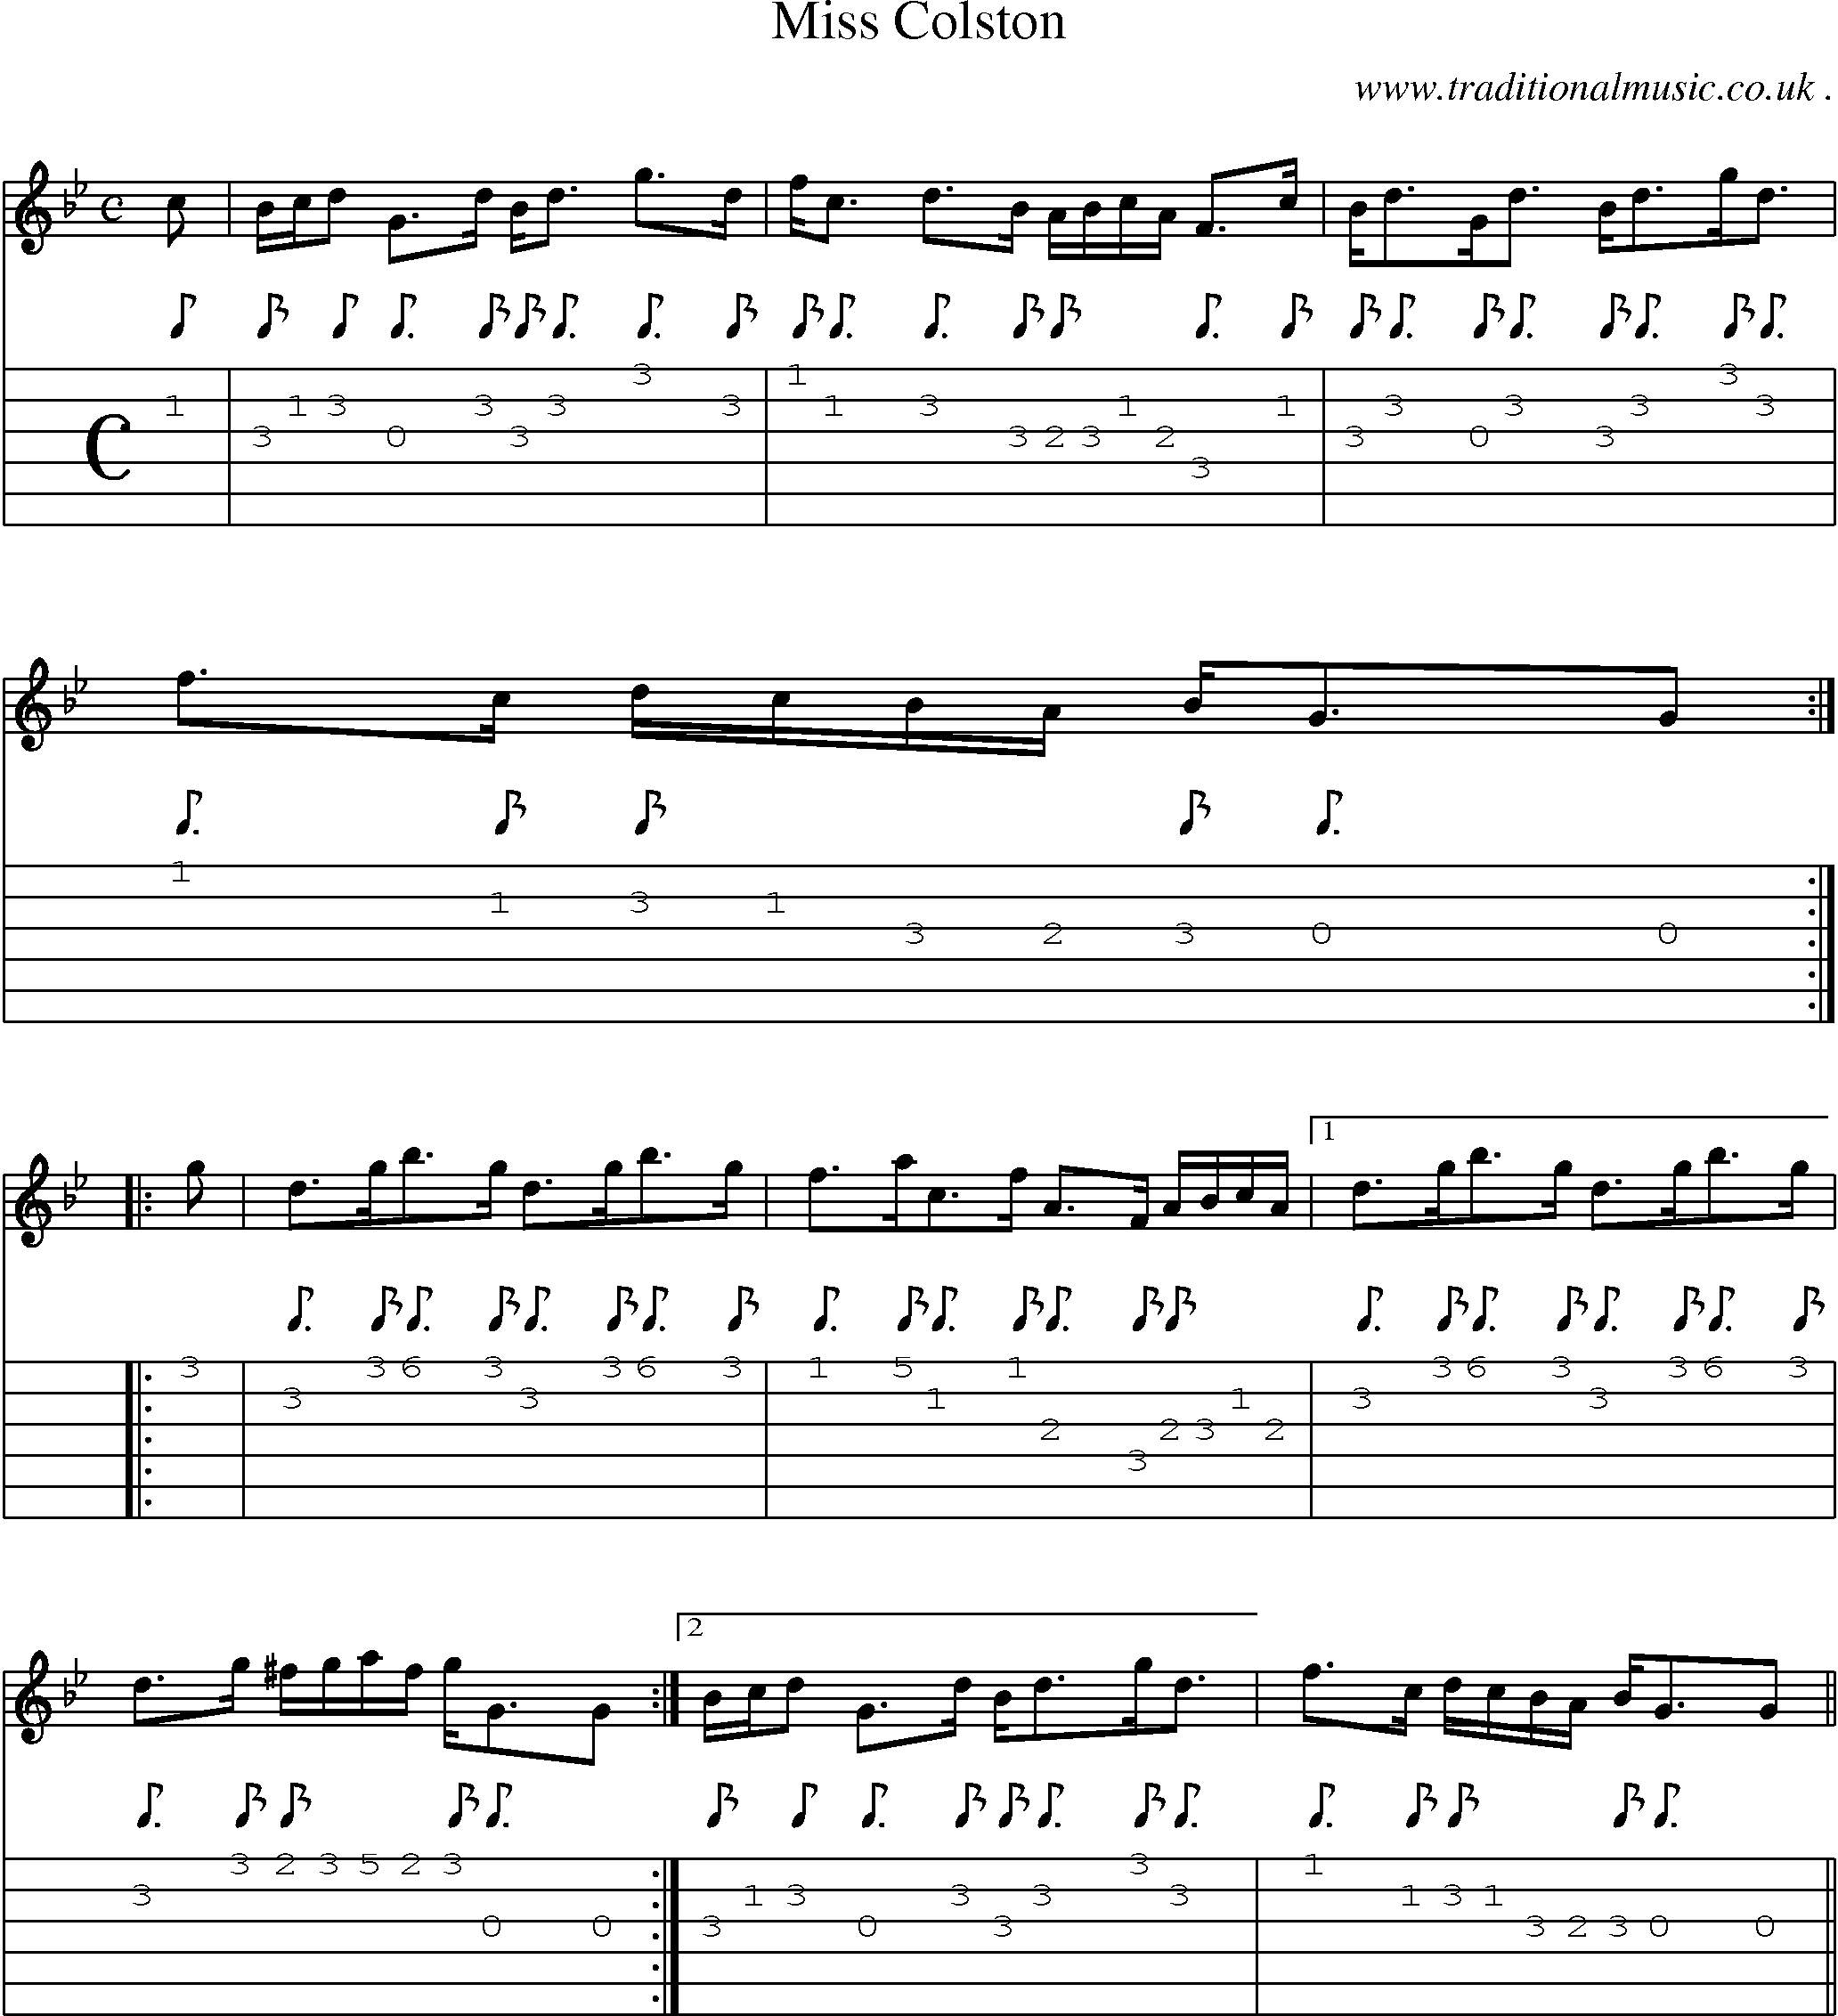 Sheet-music  score, Chords and Guitar Tabs for Miss Colston